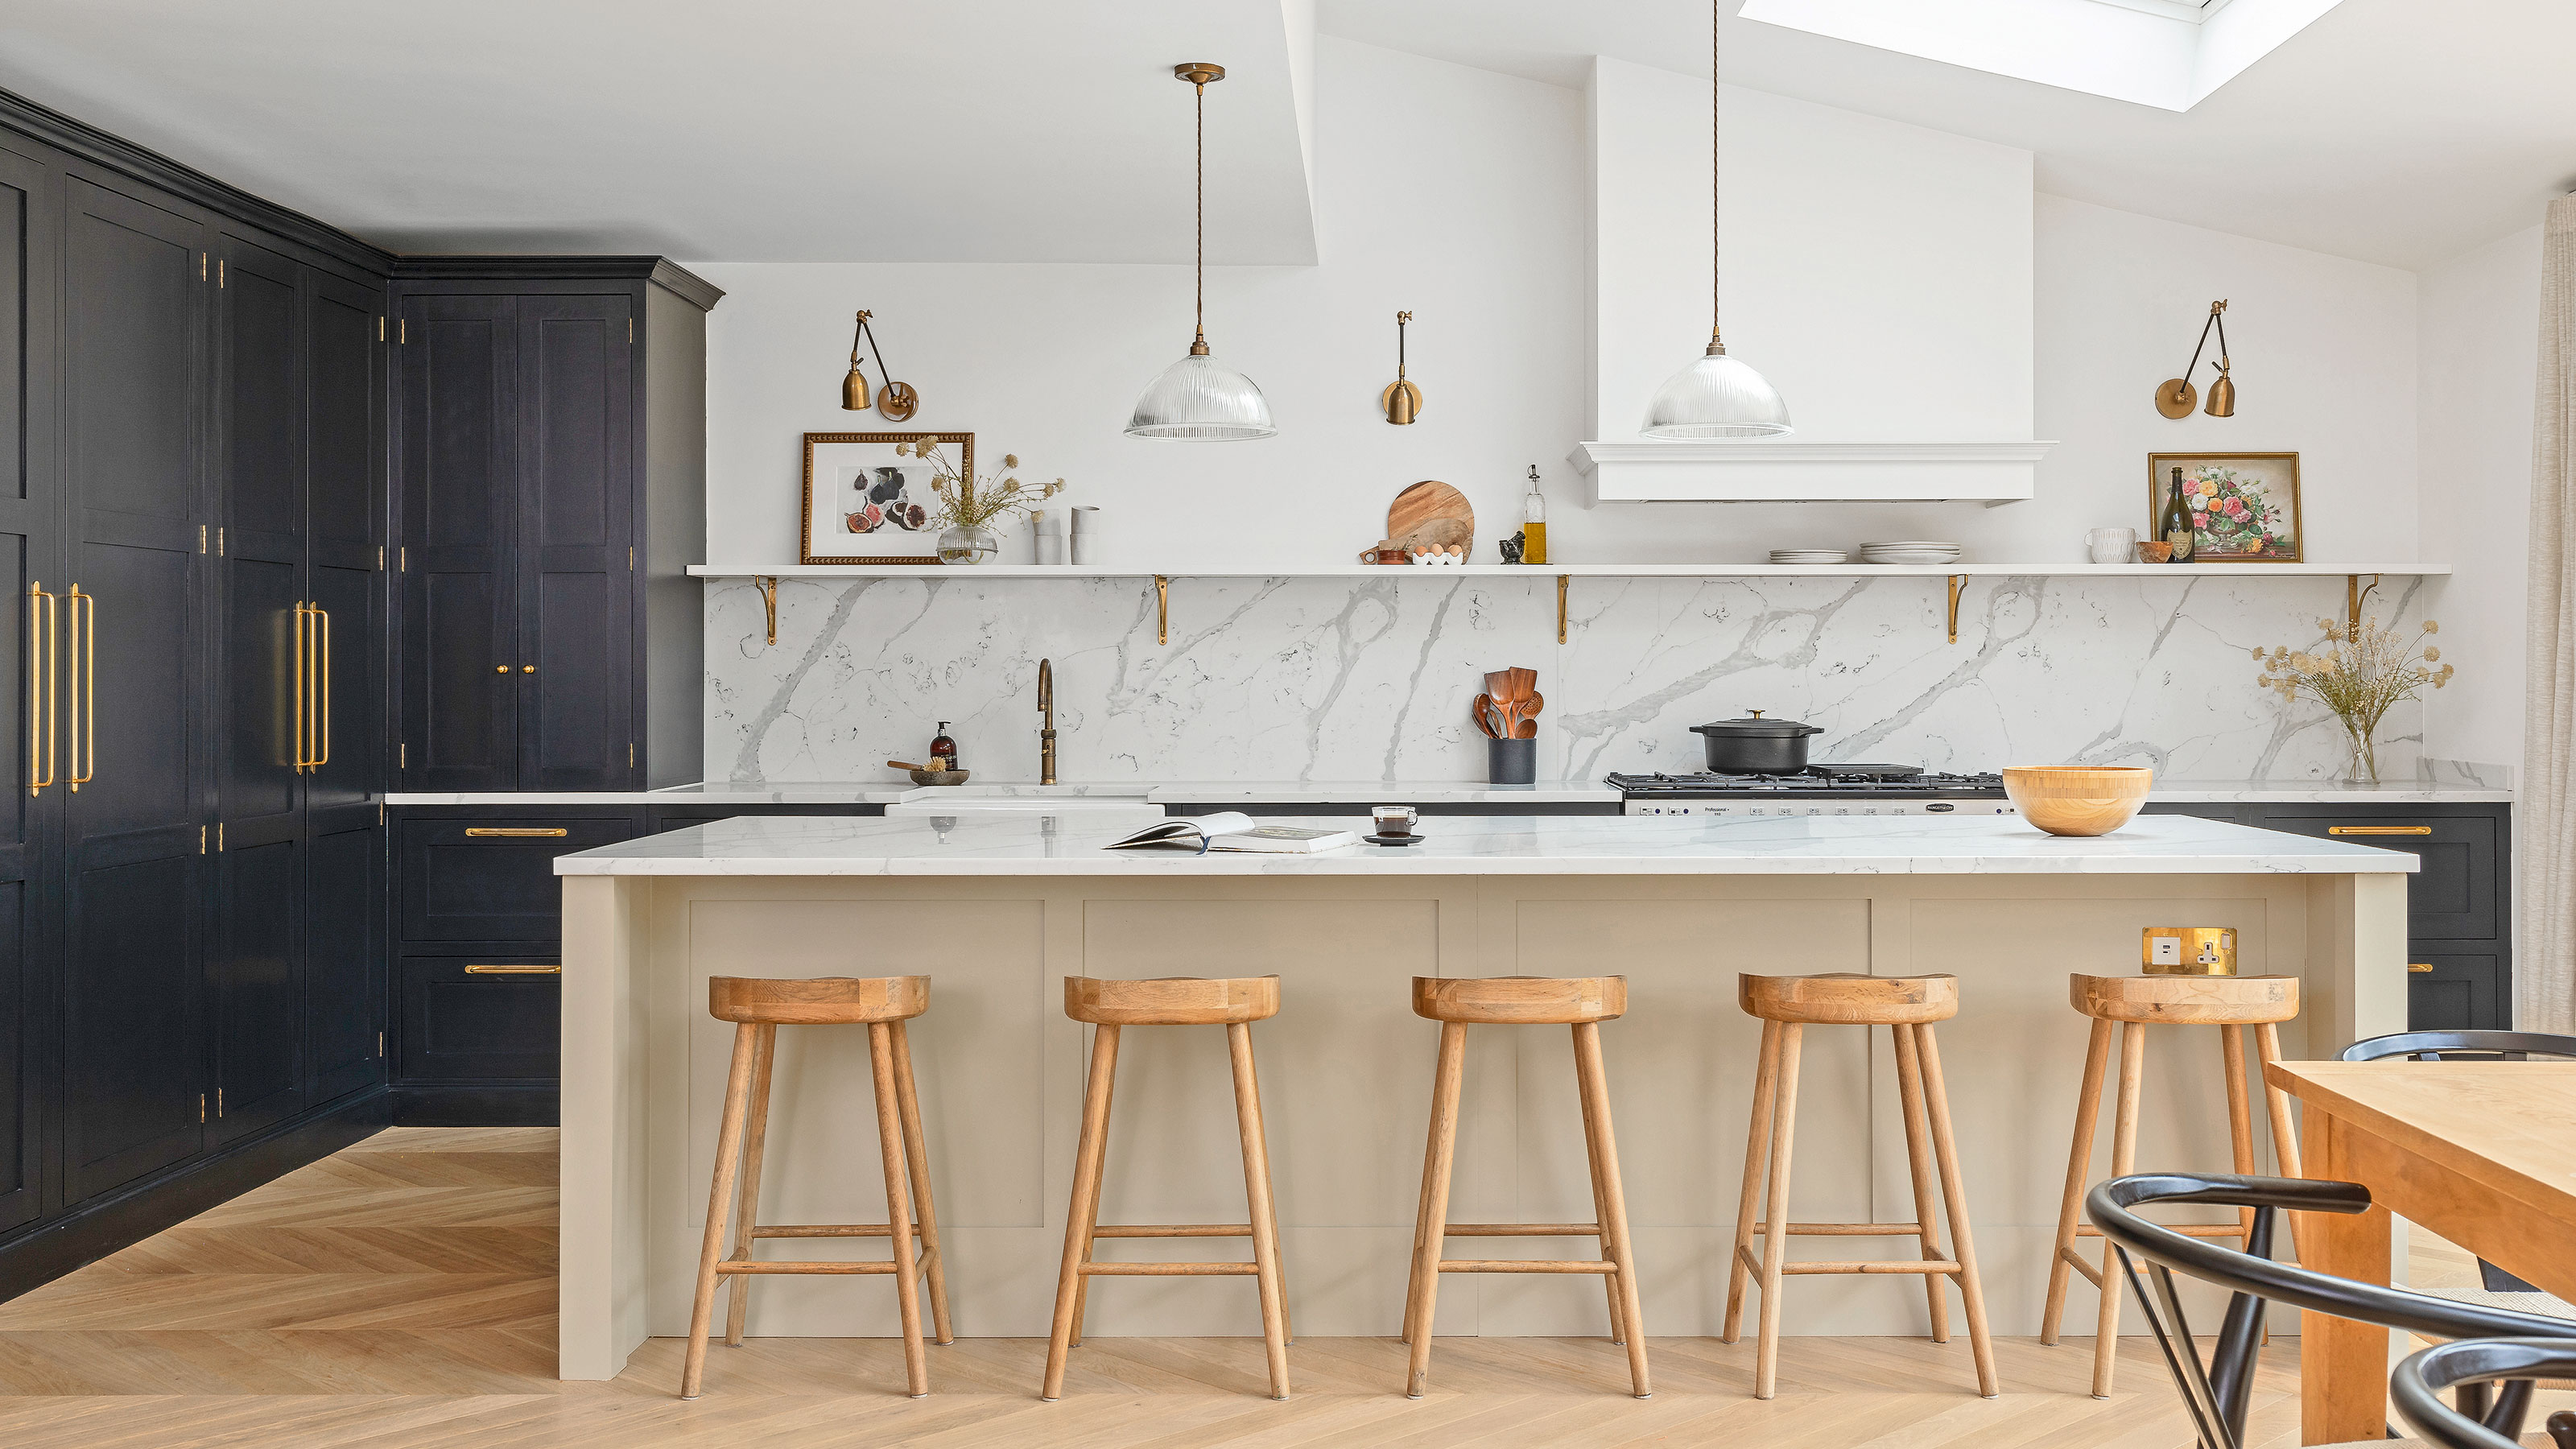 Kitchen Island Cabinet Base: Transform Your Kitchen with a Stunning Upgrade